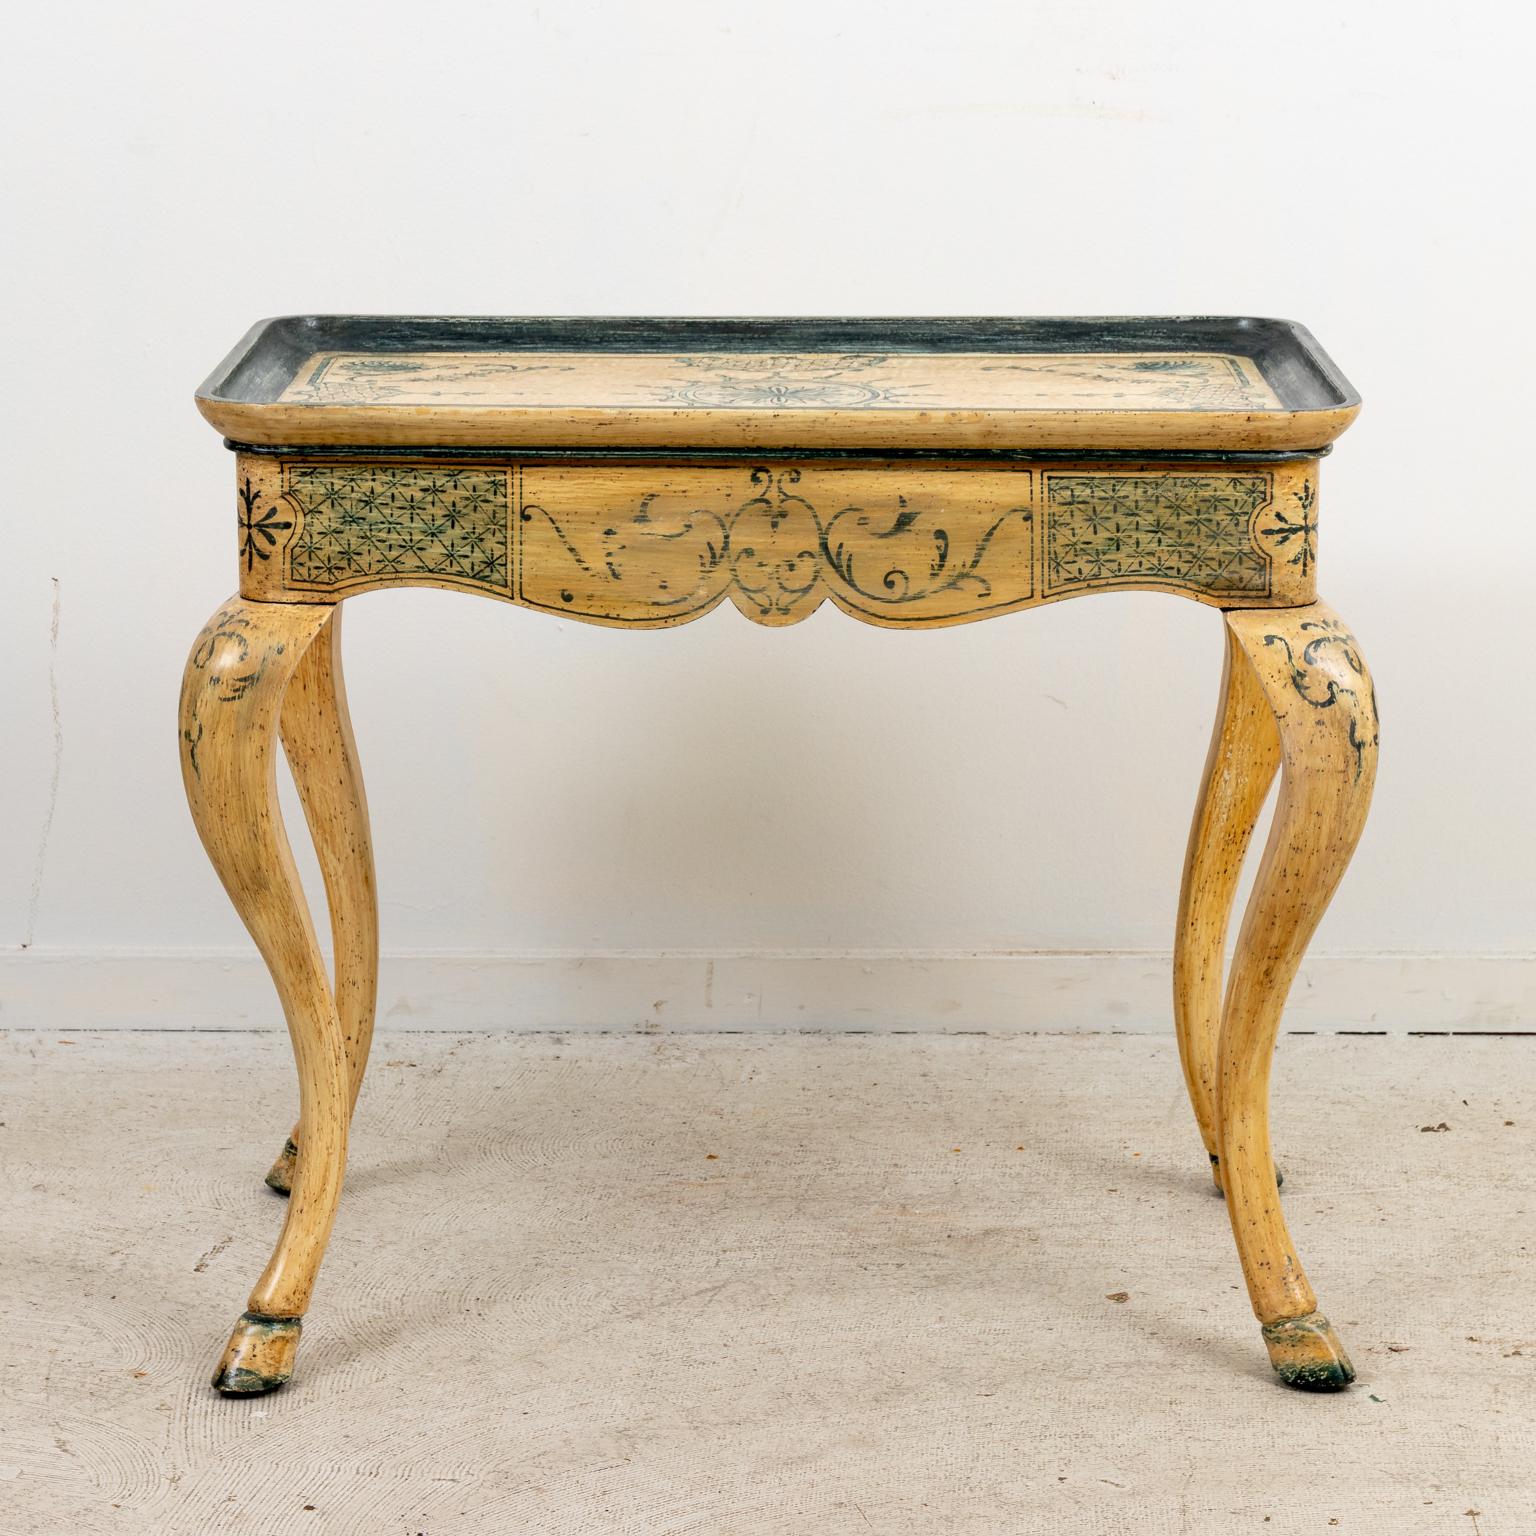 Swedish style tea table, hand painted throughout with motifs of scallop shells and scrolled foliage as seen on the tabletop, curved apron, and cabriole legs. Please note of wear consistent with age including distressed finish to the paint, minor